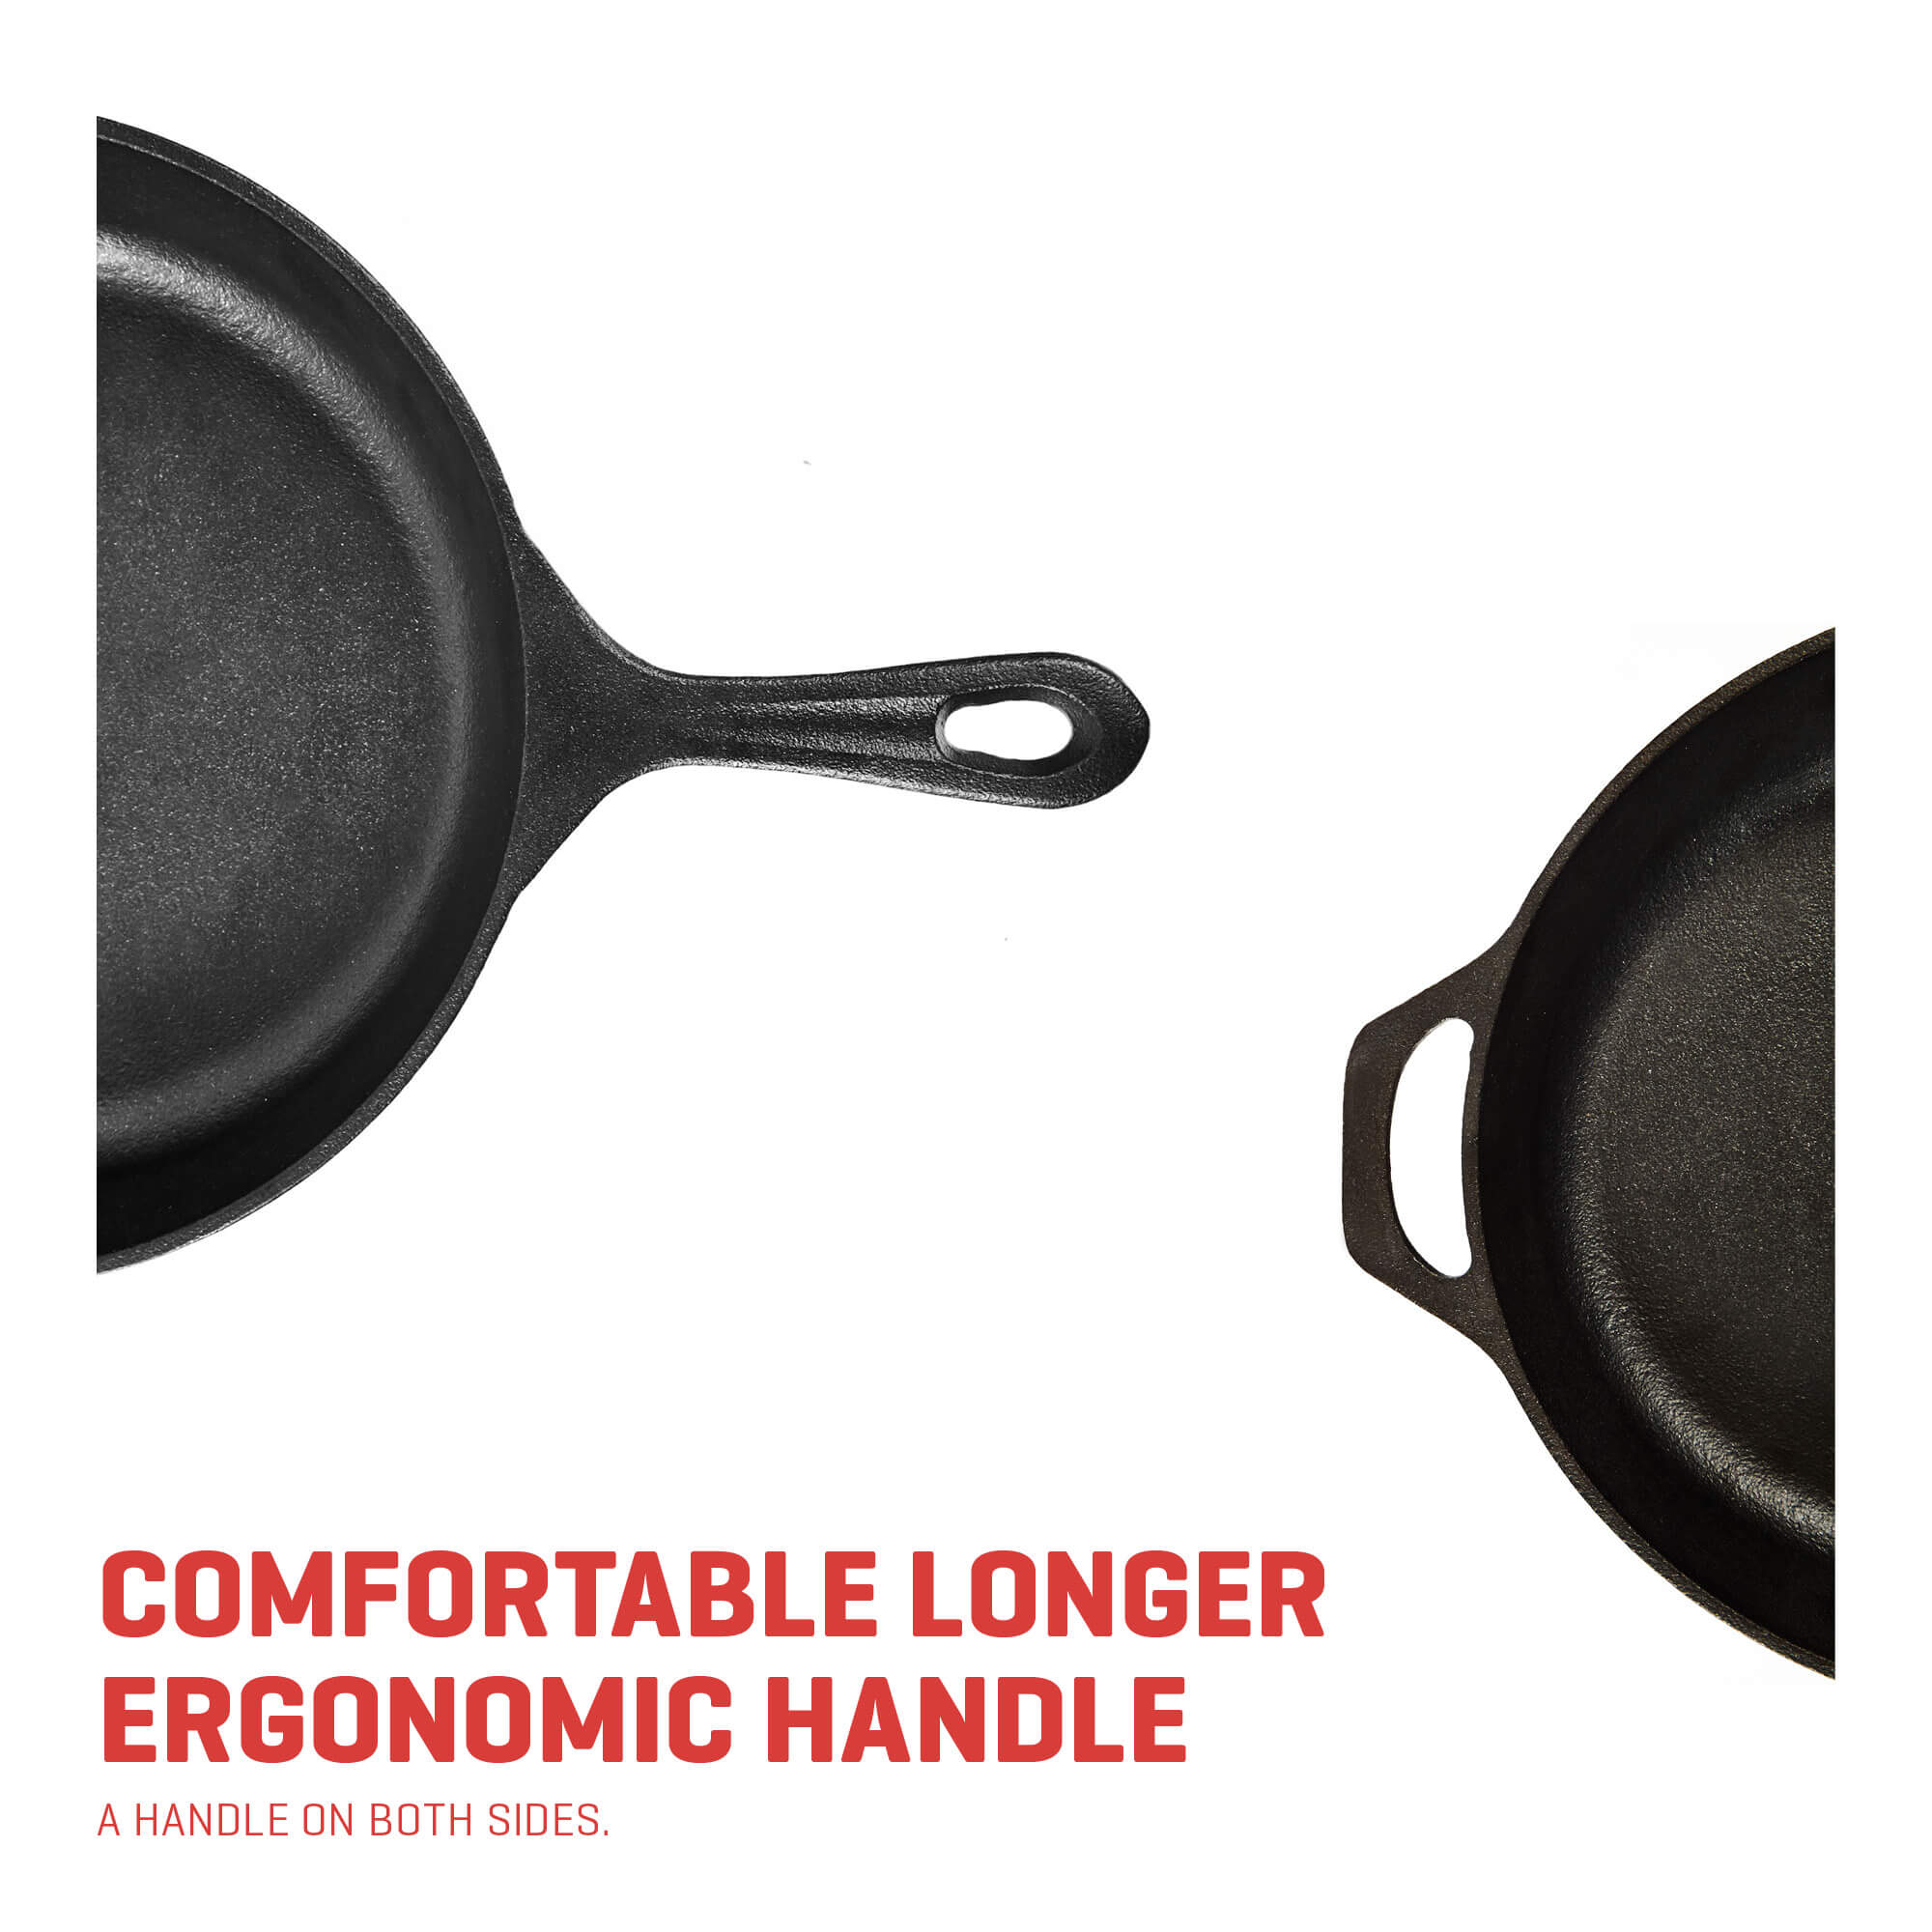 I want to buy a Lodge cast iron skillet but I don't know wich size